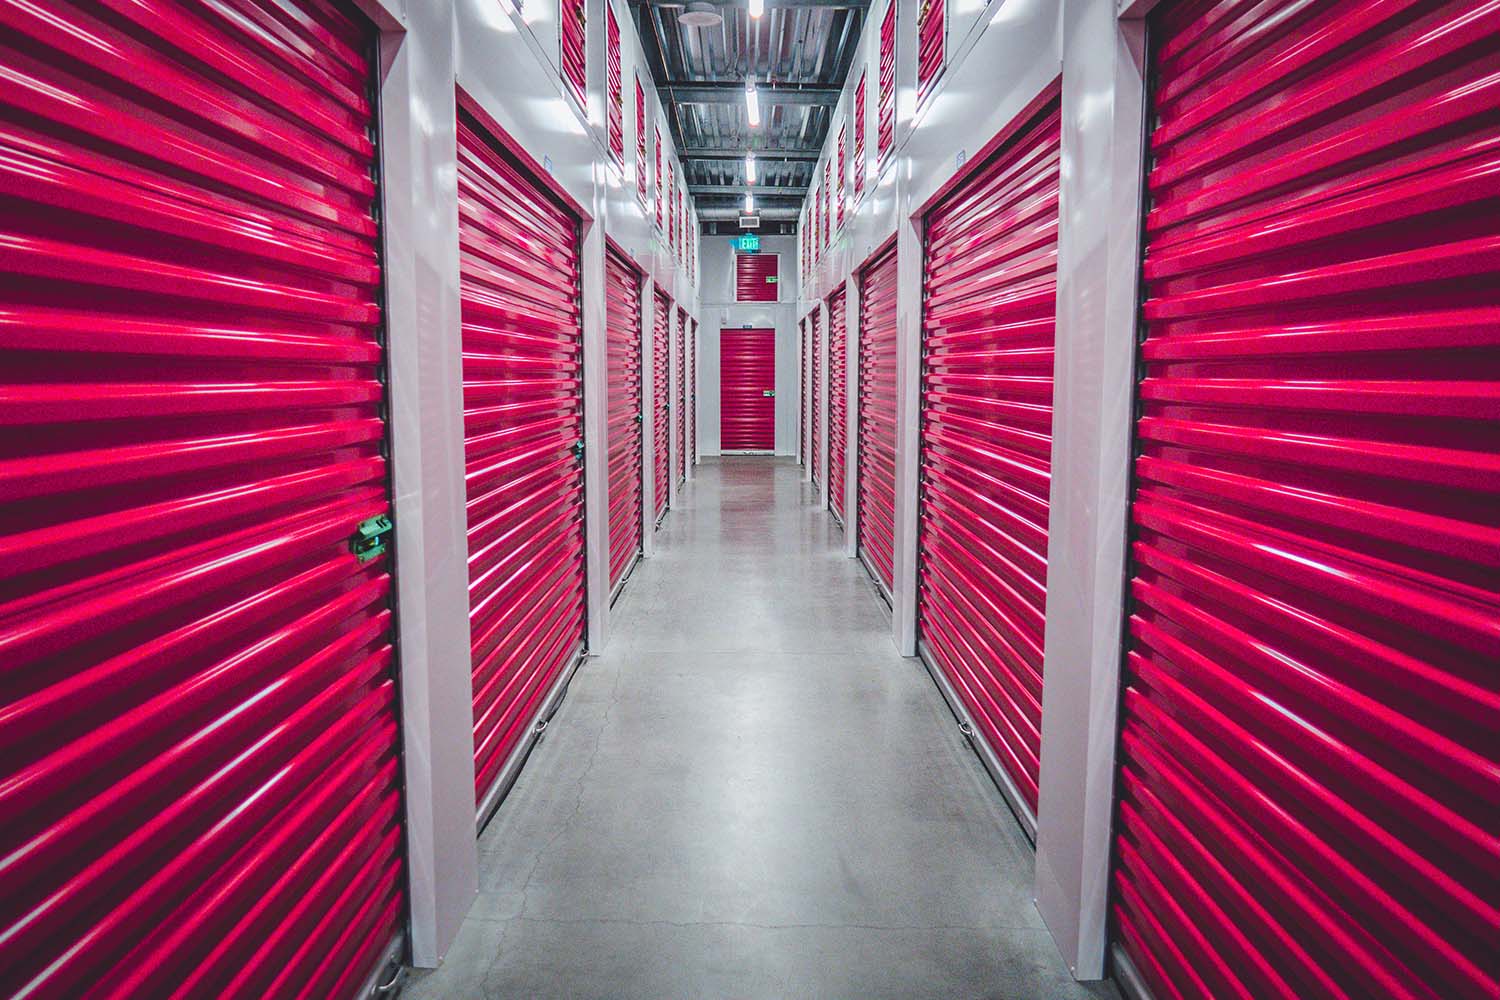 Things to Consider Before Renting a Storage Unit